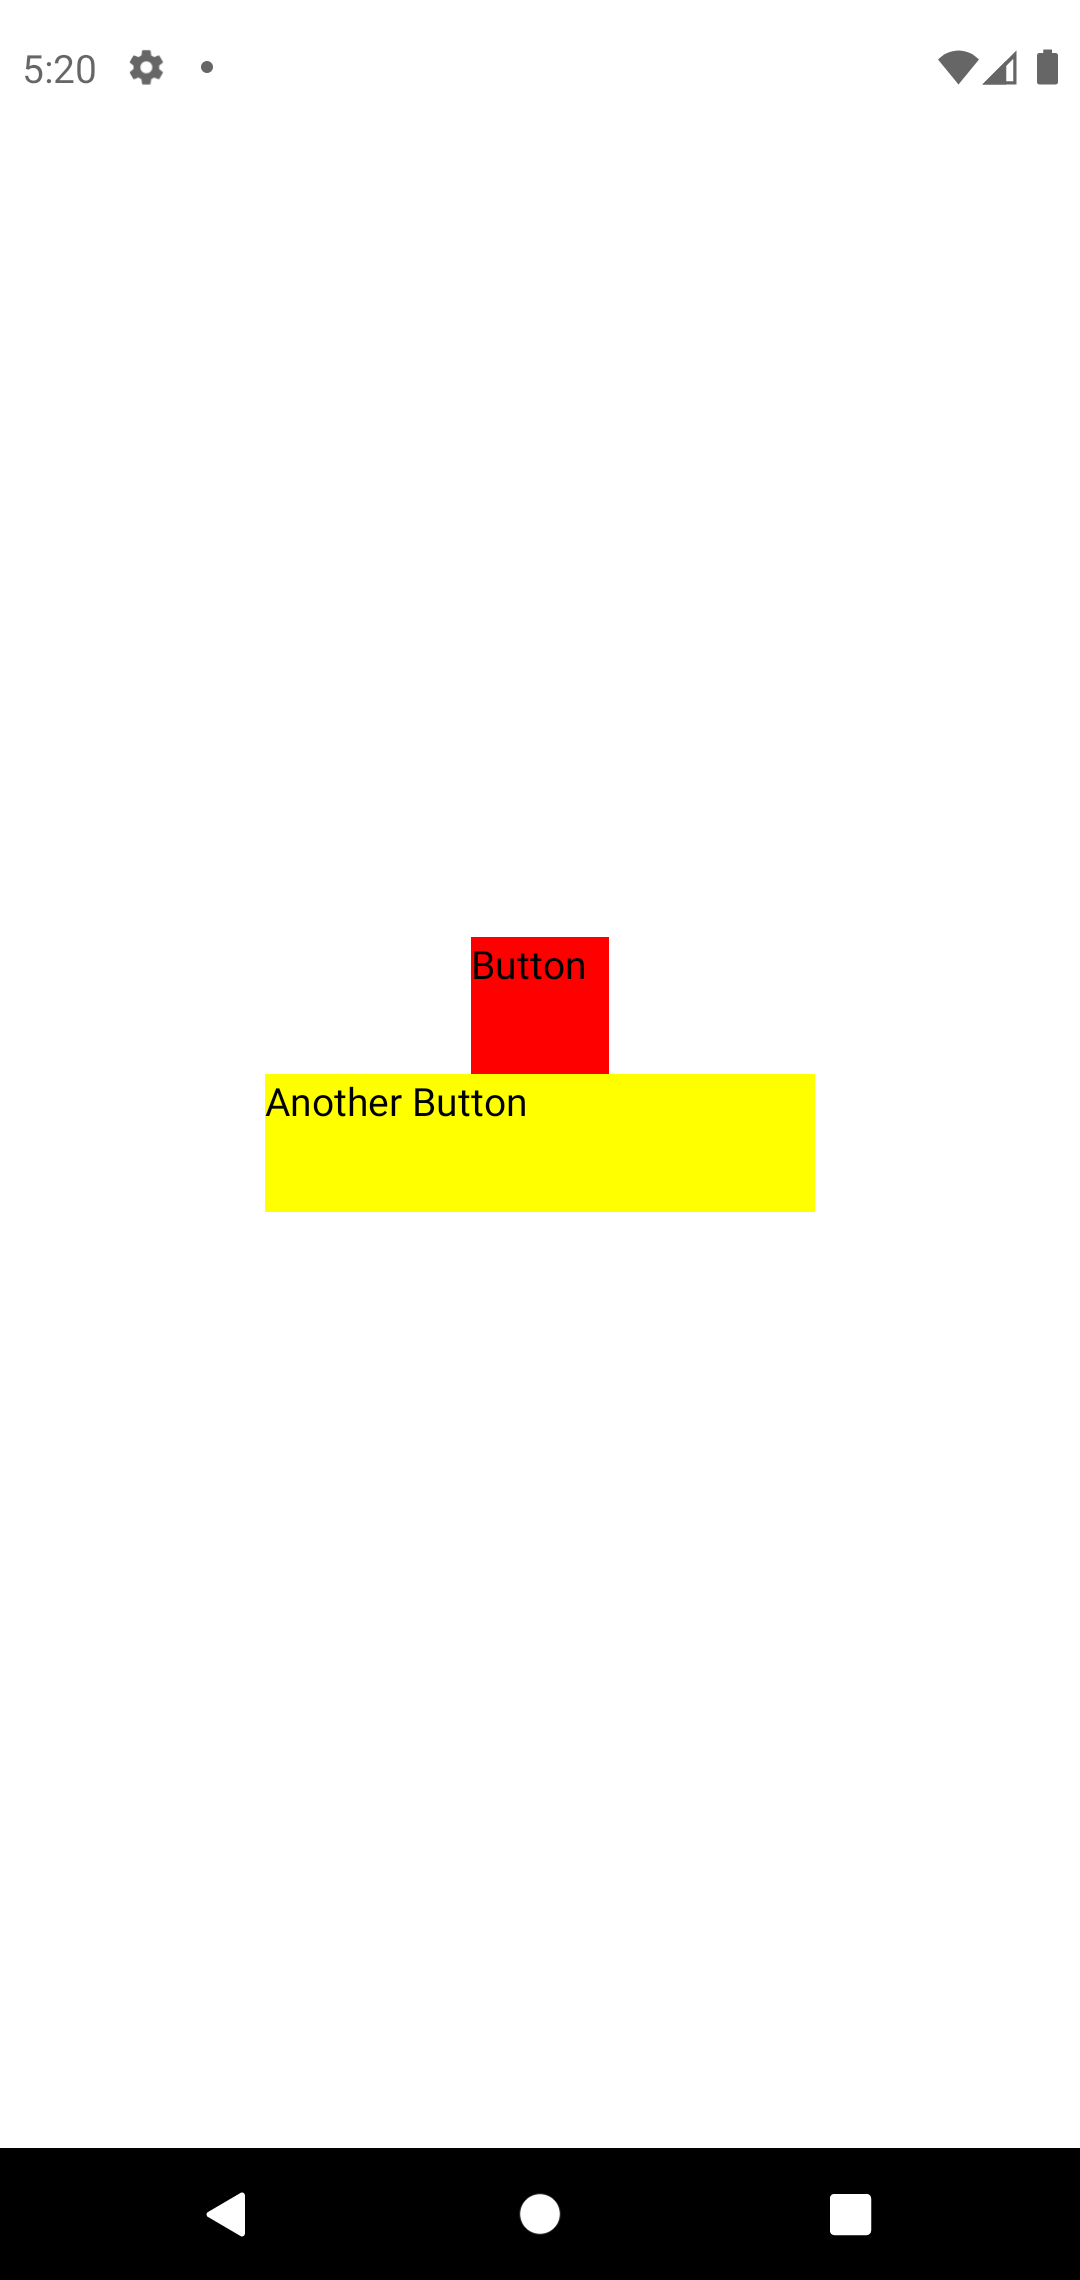 An Android Simulator Screen showing a red square in the middle and a yellow rectangle just below.